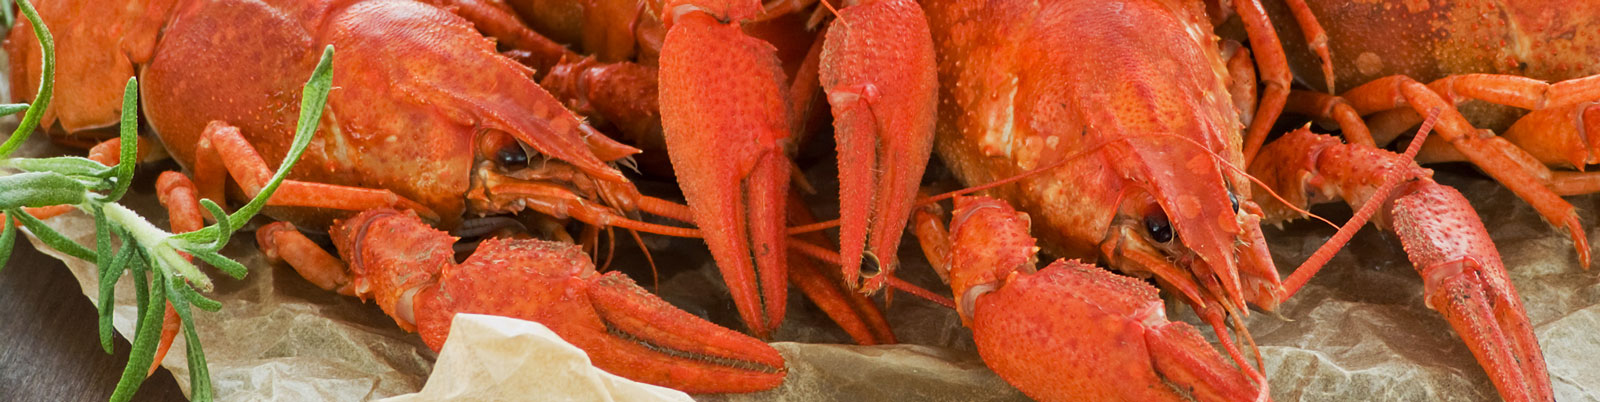 Get Hooked on Local Seafood – From the Maine Lobster to the Louisiana Crawfish